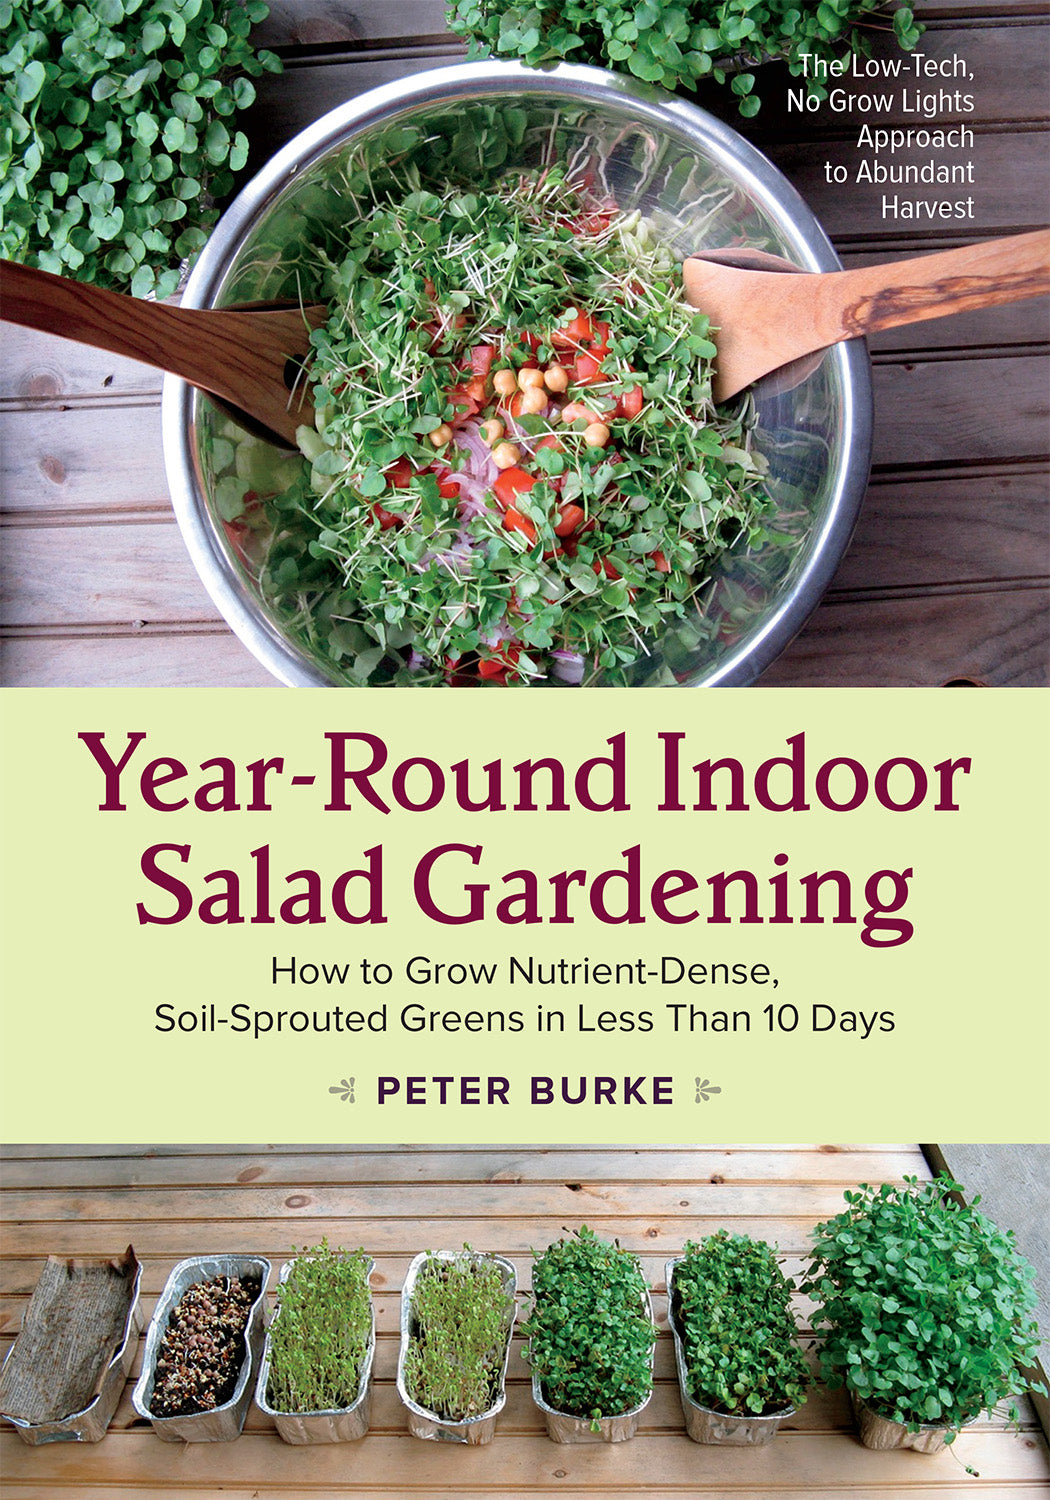 Year-Round Indoor Salad GardeninHow to Grow Nutrient-Dense, Soil-Sprouted Greens in Less Than 10 days by Peter Burke